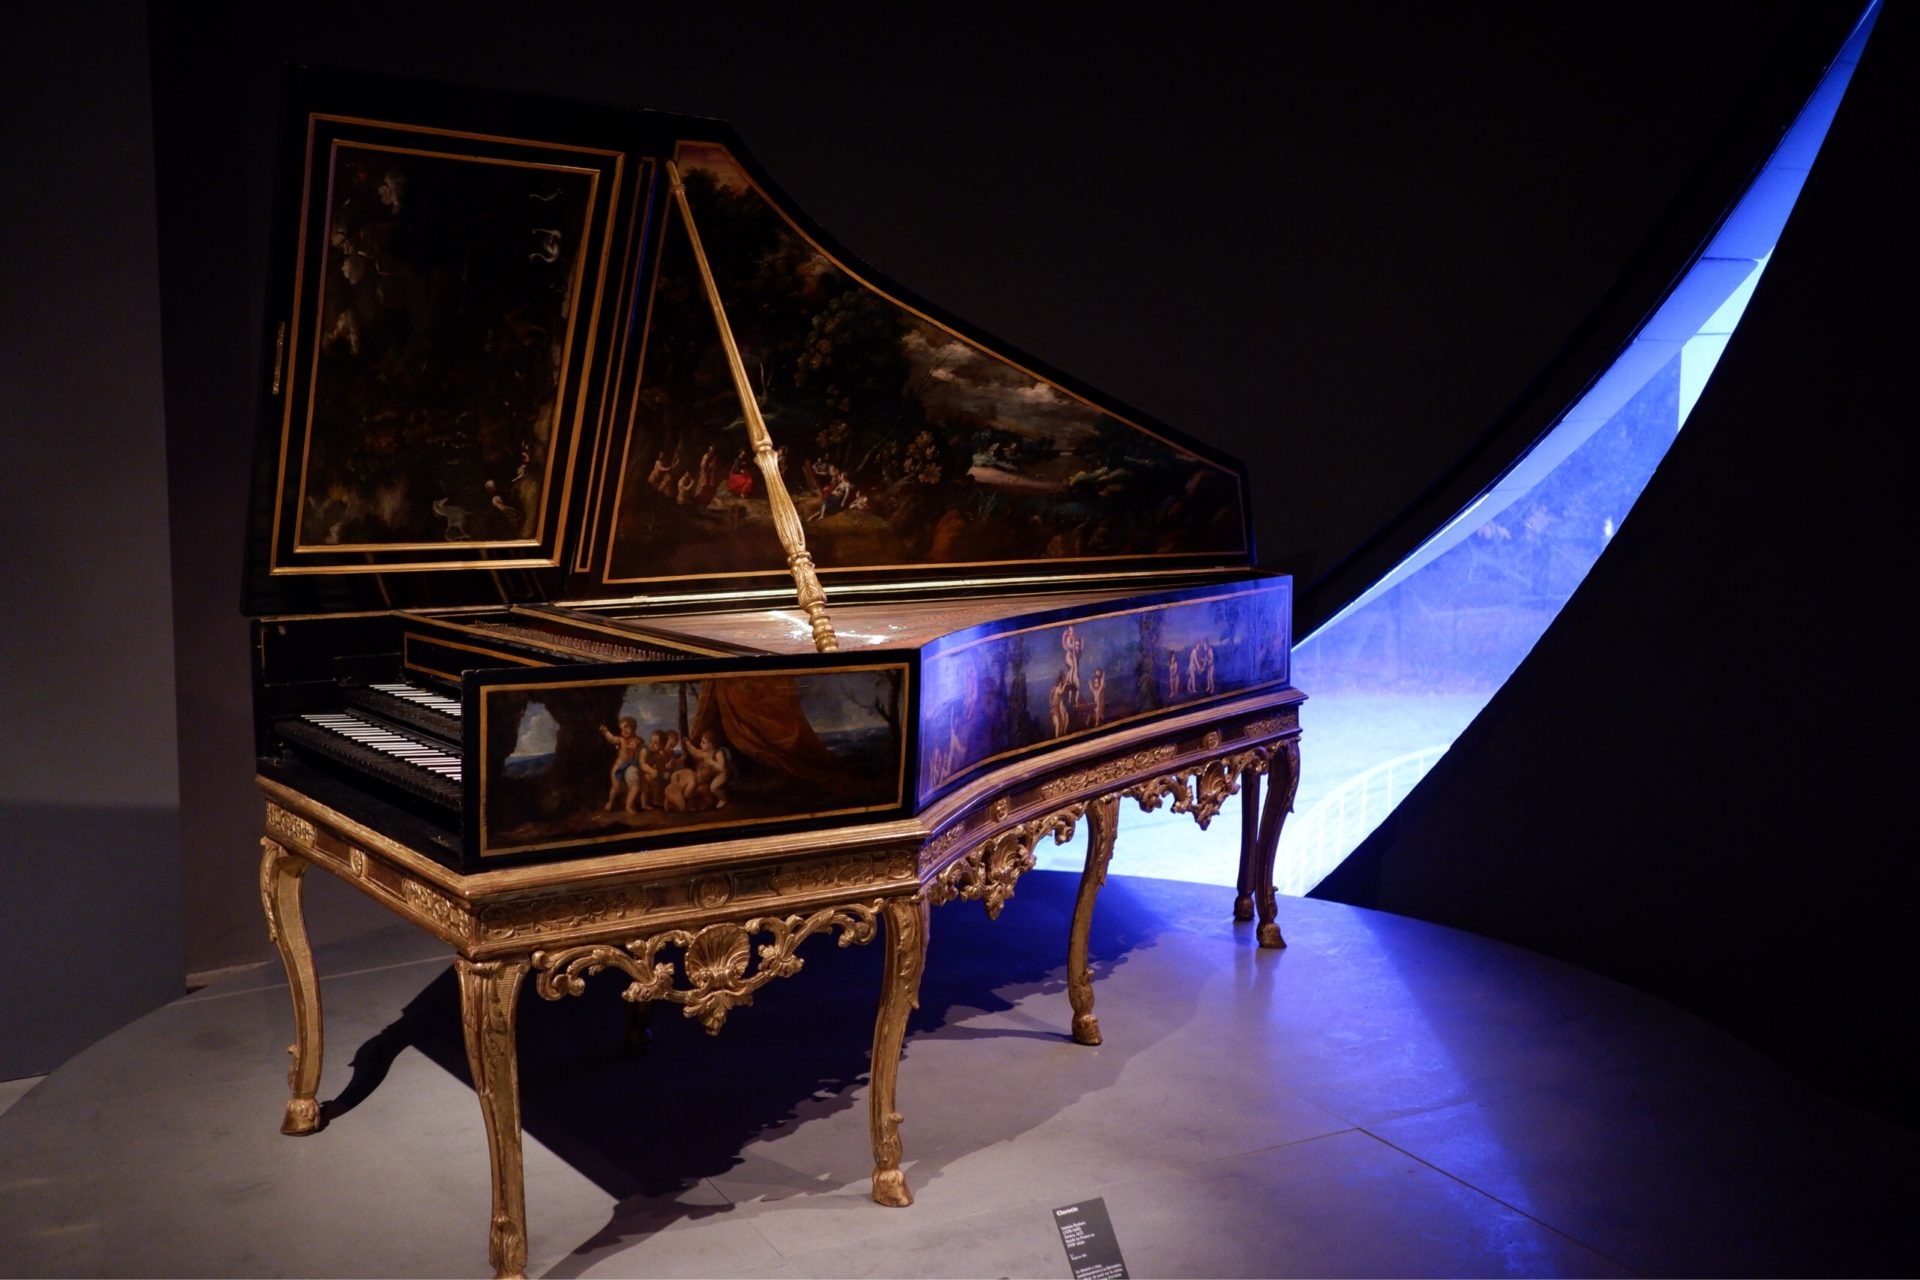 Fortepiano: Paul Tunzi, Vintage Harpsichord Decorated With Reproductions Of Paintings. 1920x1280 HD Wallpaper.